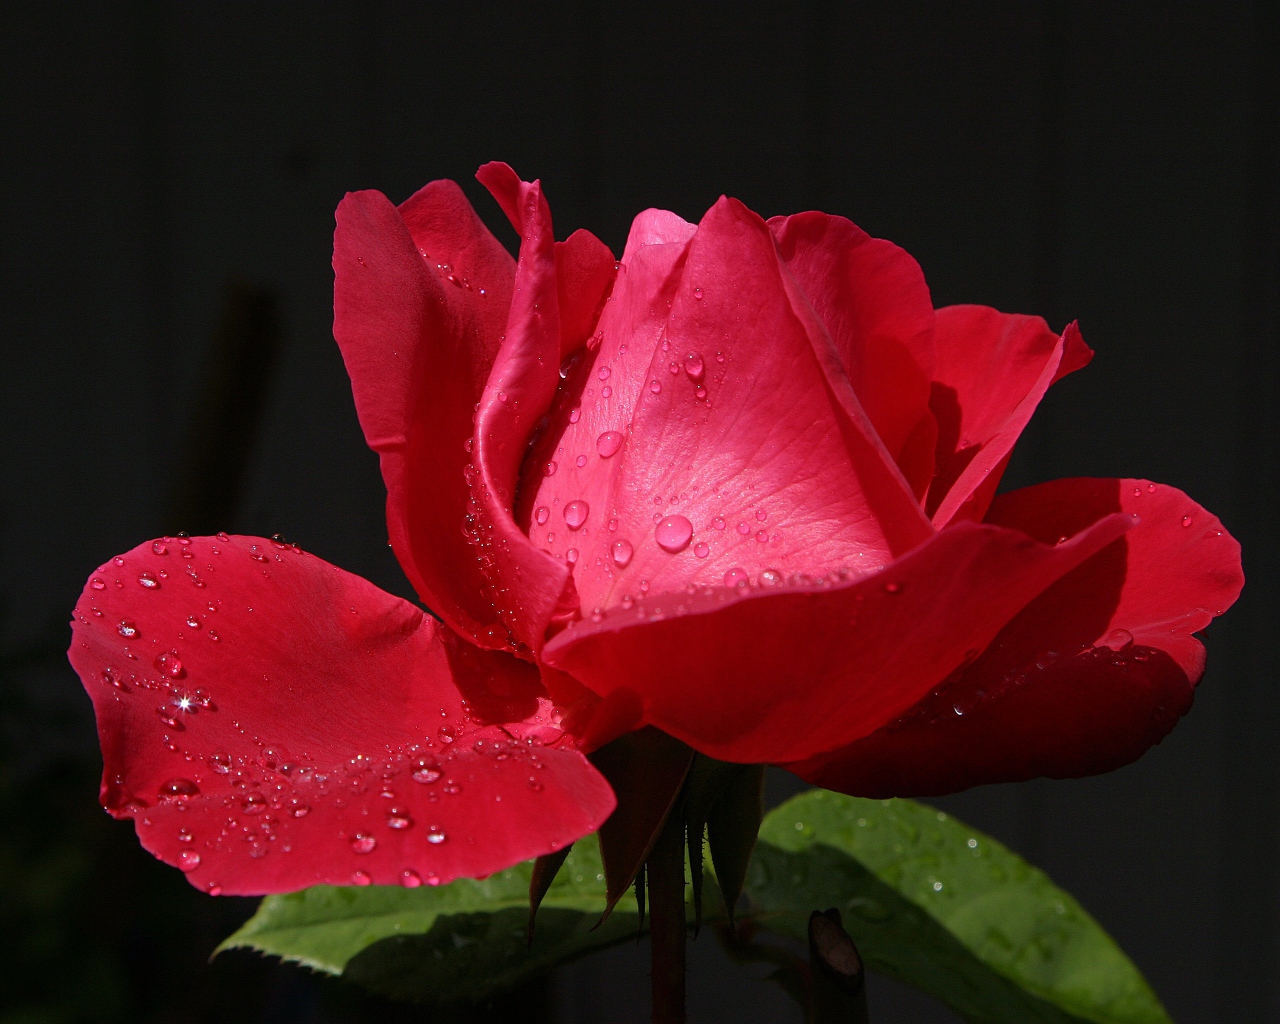 Beautiful red rose with dew on petals close-up